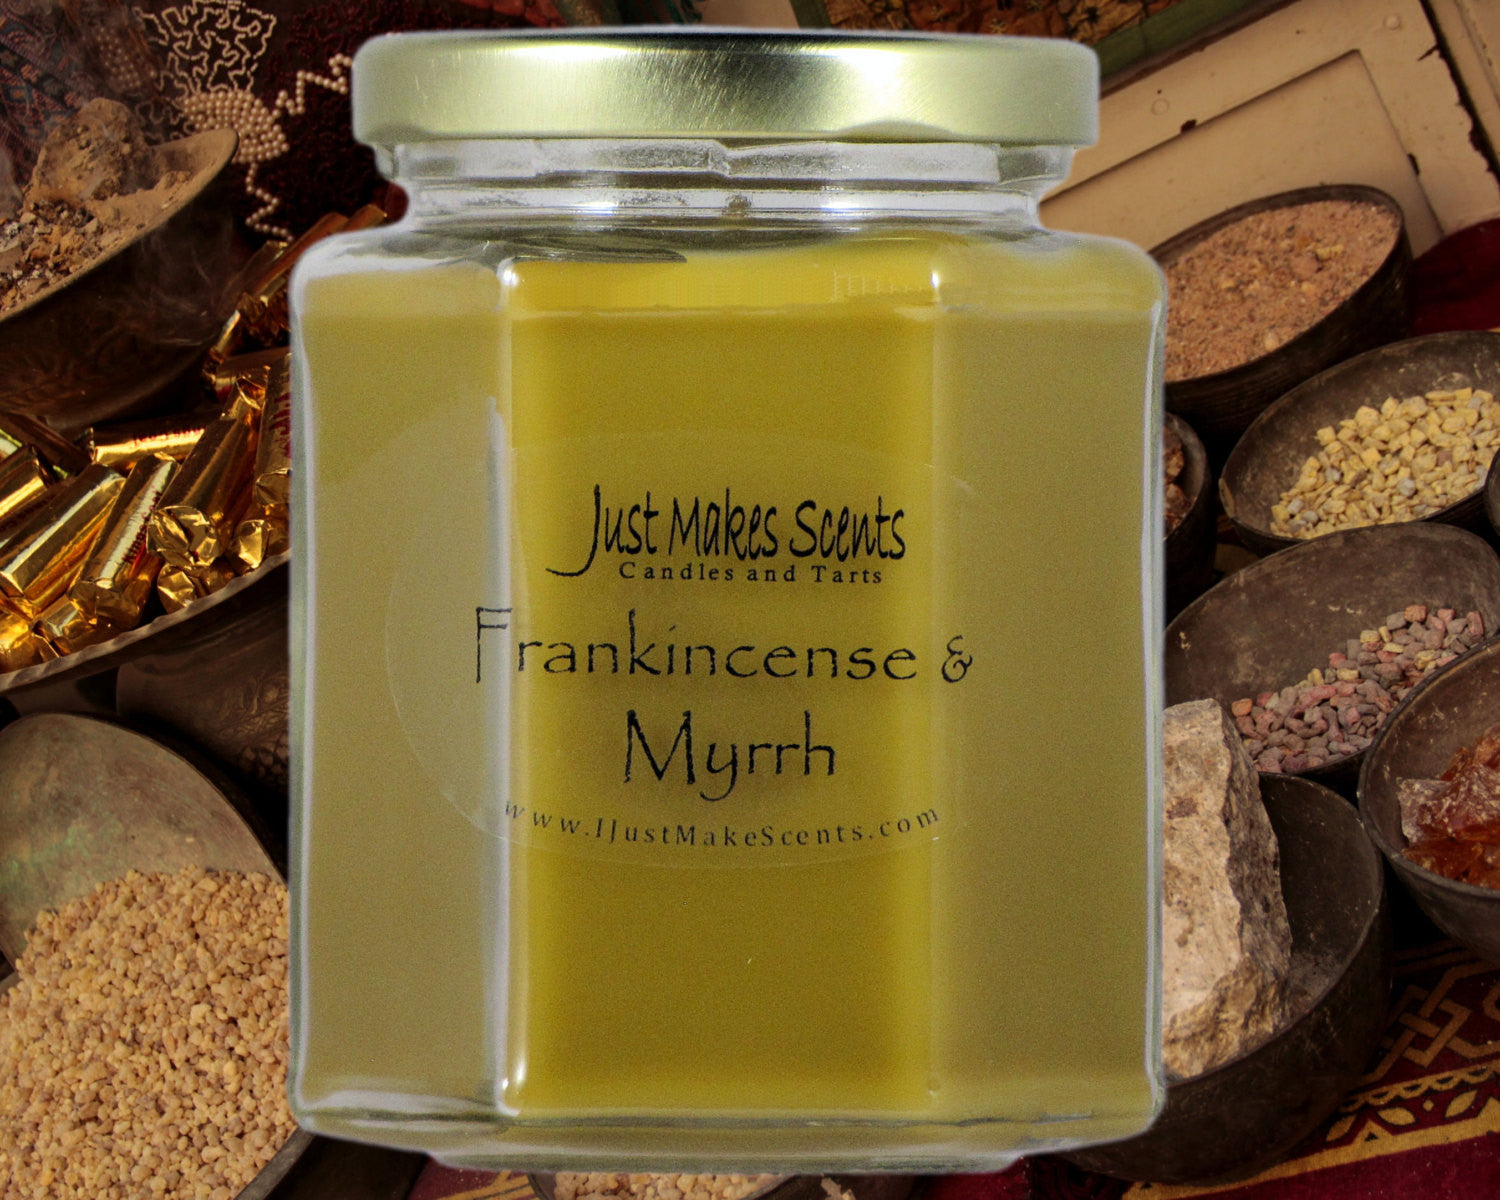 Frankincense and myrrh: Ancient scents of the season